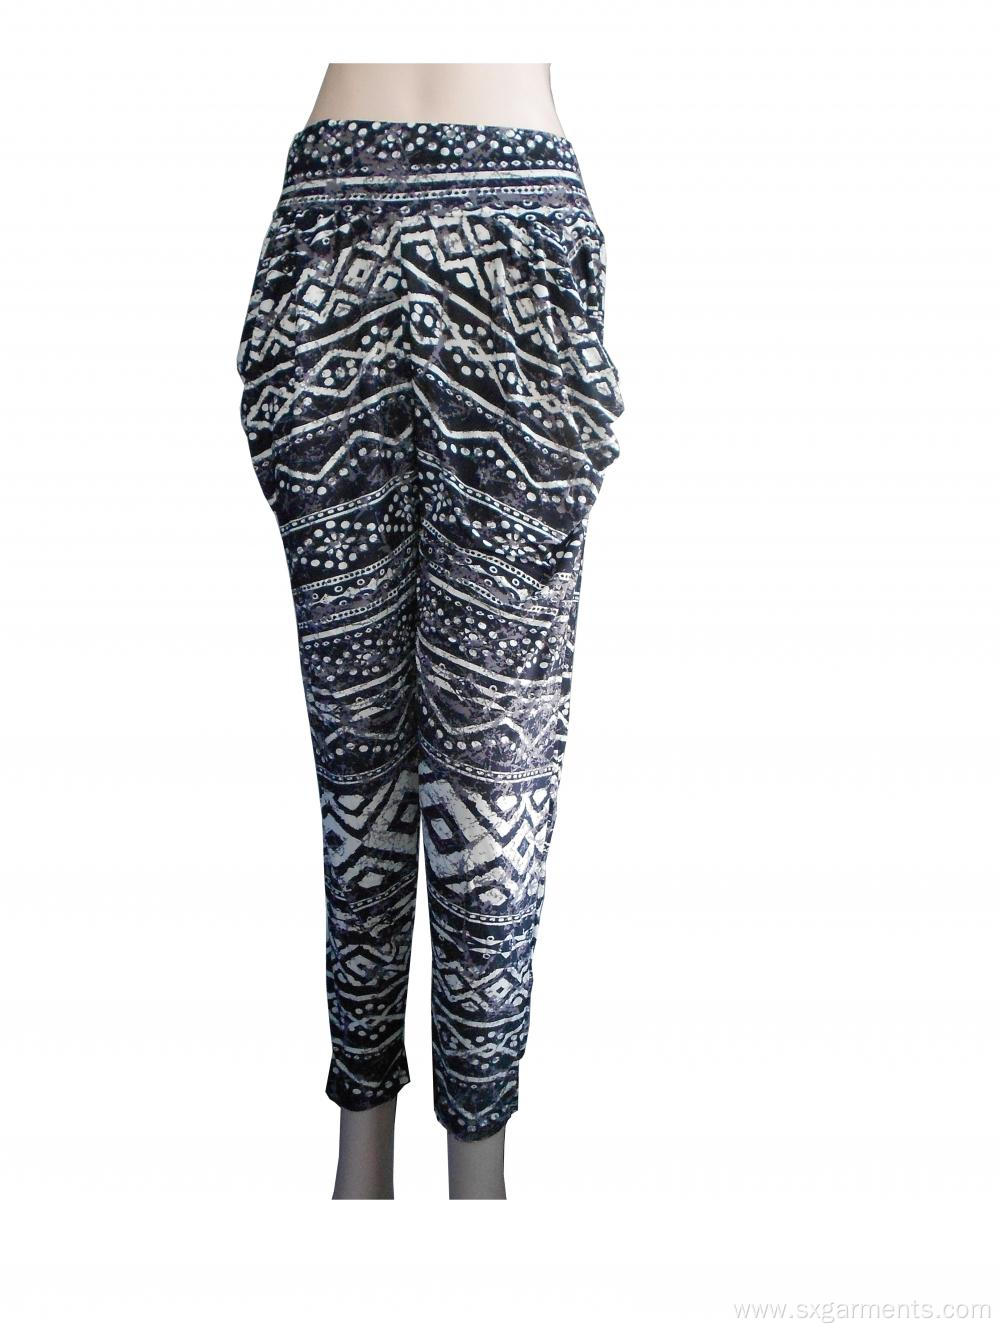 Top quality 95% Polyester 5% Spandex Lady's Leggings